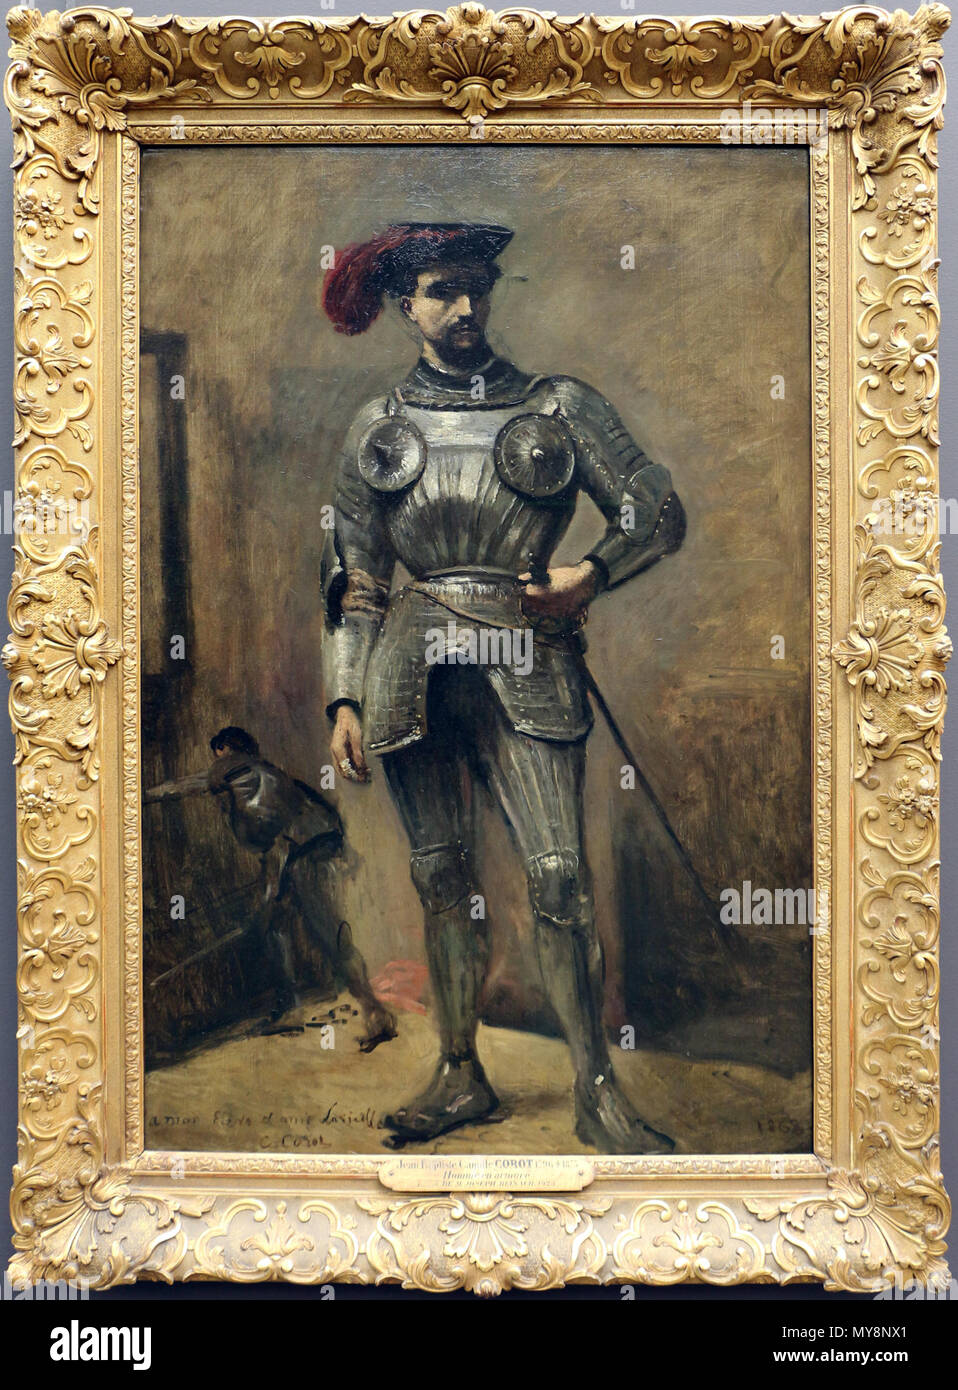 . the man in armor .  English: Paintings by Jean-Baptiste-Camille Corot in the Louvre . 1868 ; 2016-06-16 17:21:40. Sailko 94 Camille corot, l'uomo in armatura detto anche il cavaliere, 1868 Stock Photo